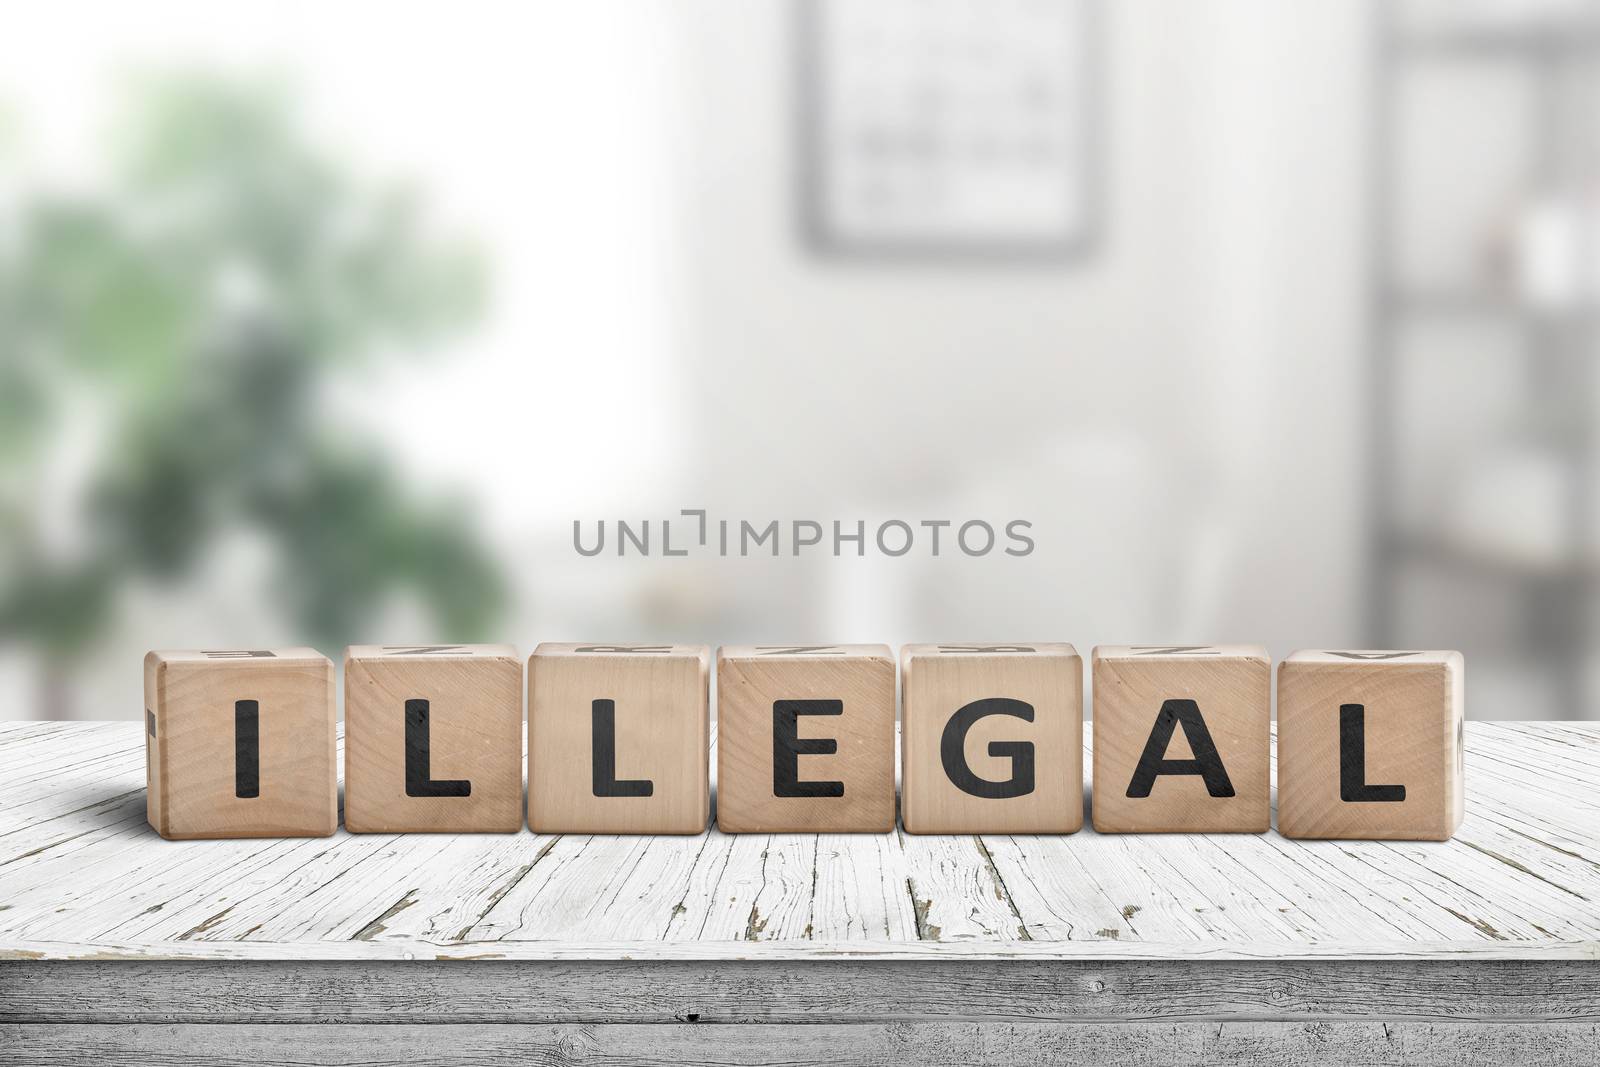 Illegal message on a wooden desk in a bright living room in daylight